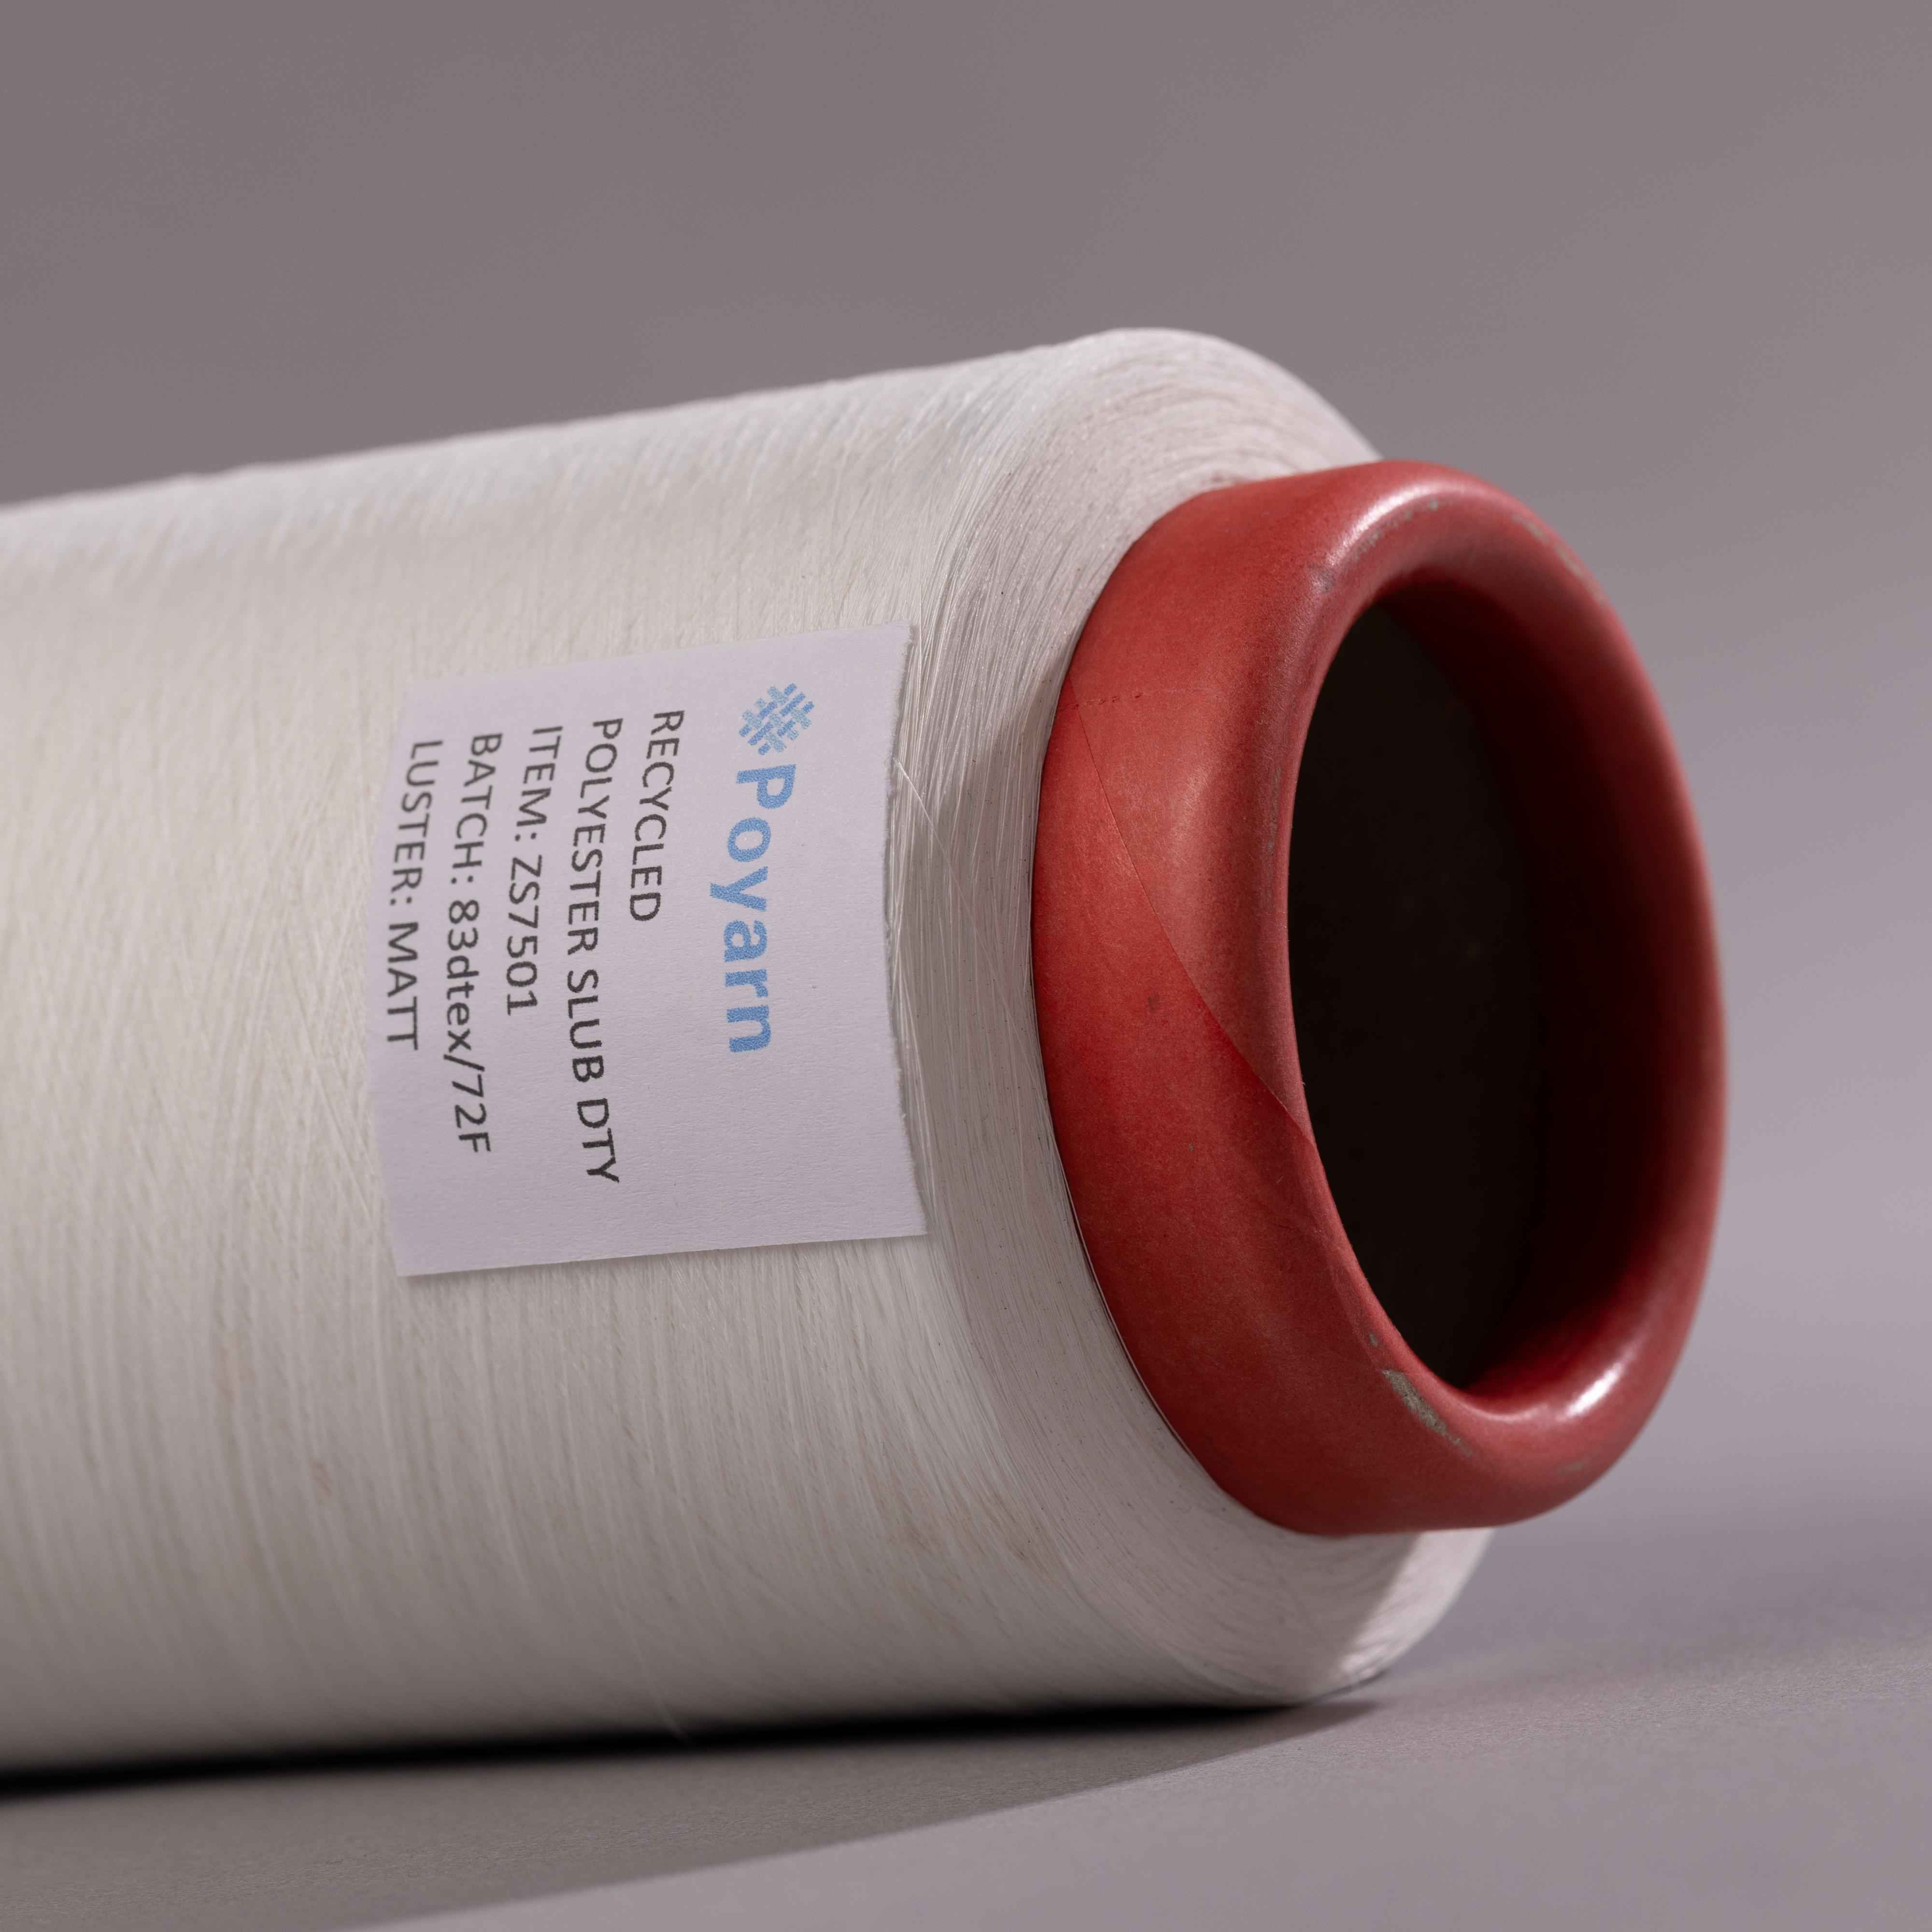 What Are the Benefits and Drawbacks of Recycled Polyester Yarn?